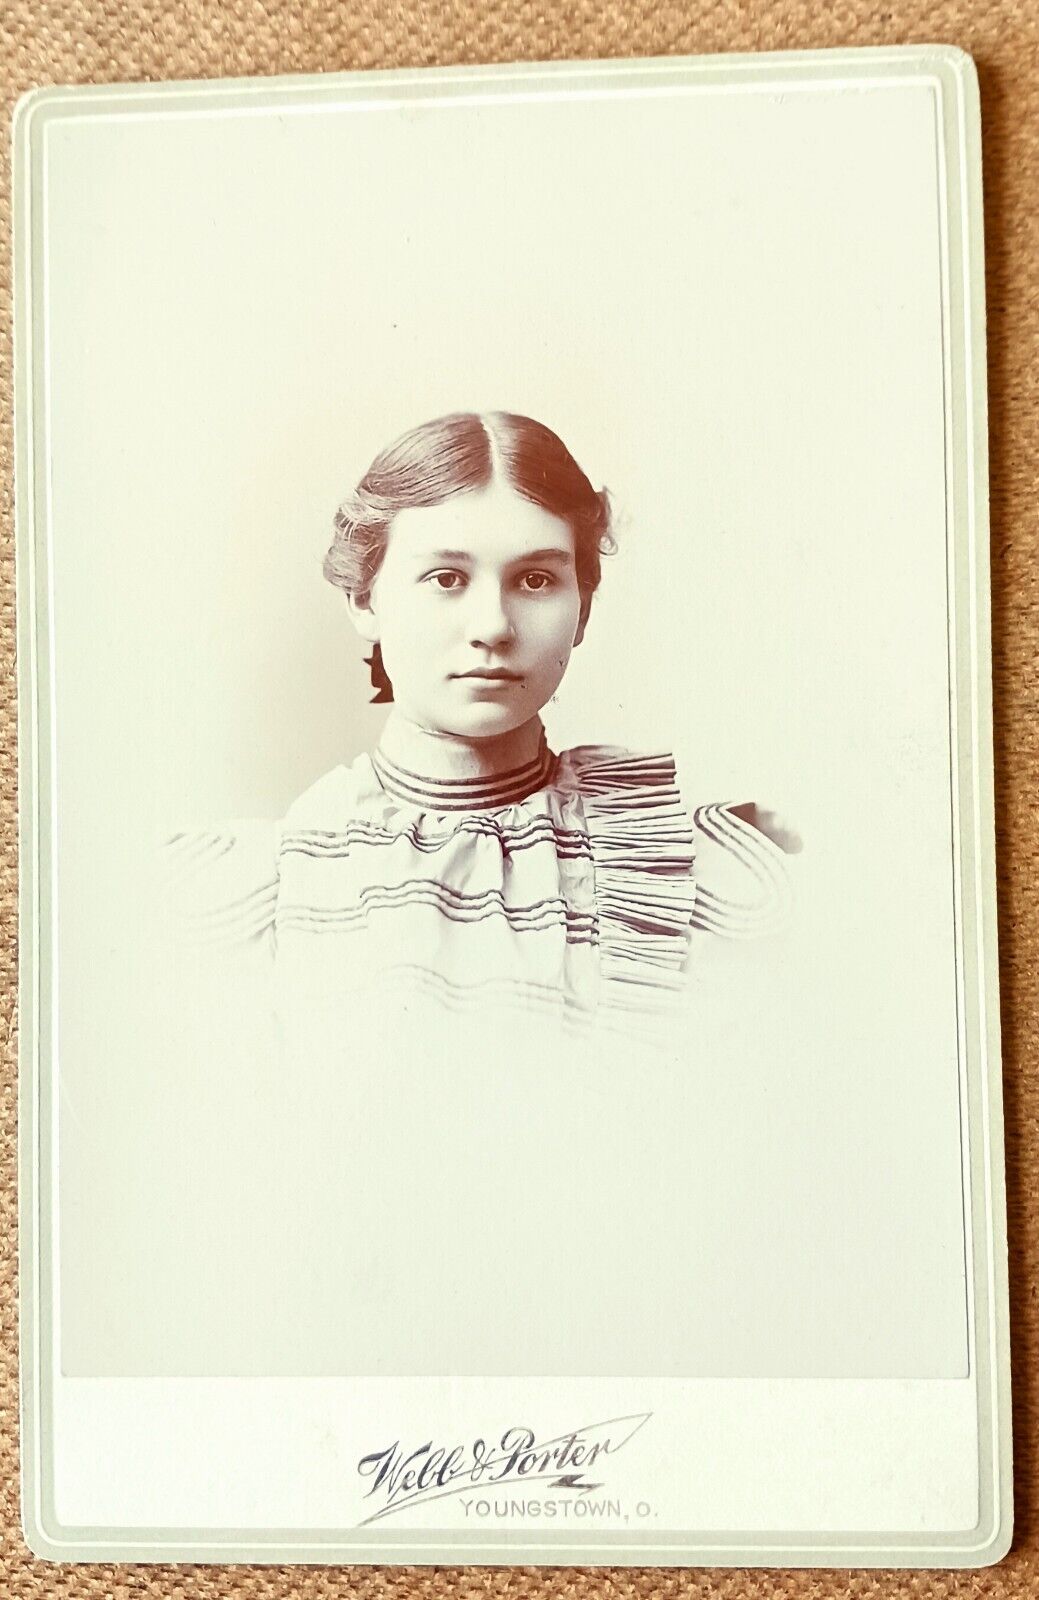 Vintage 1899 Young Lady Girl Photo Webb & Porter Youngstown Ohio